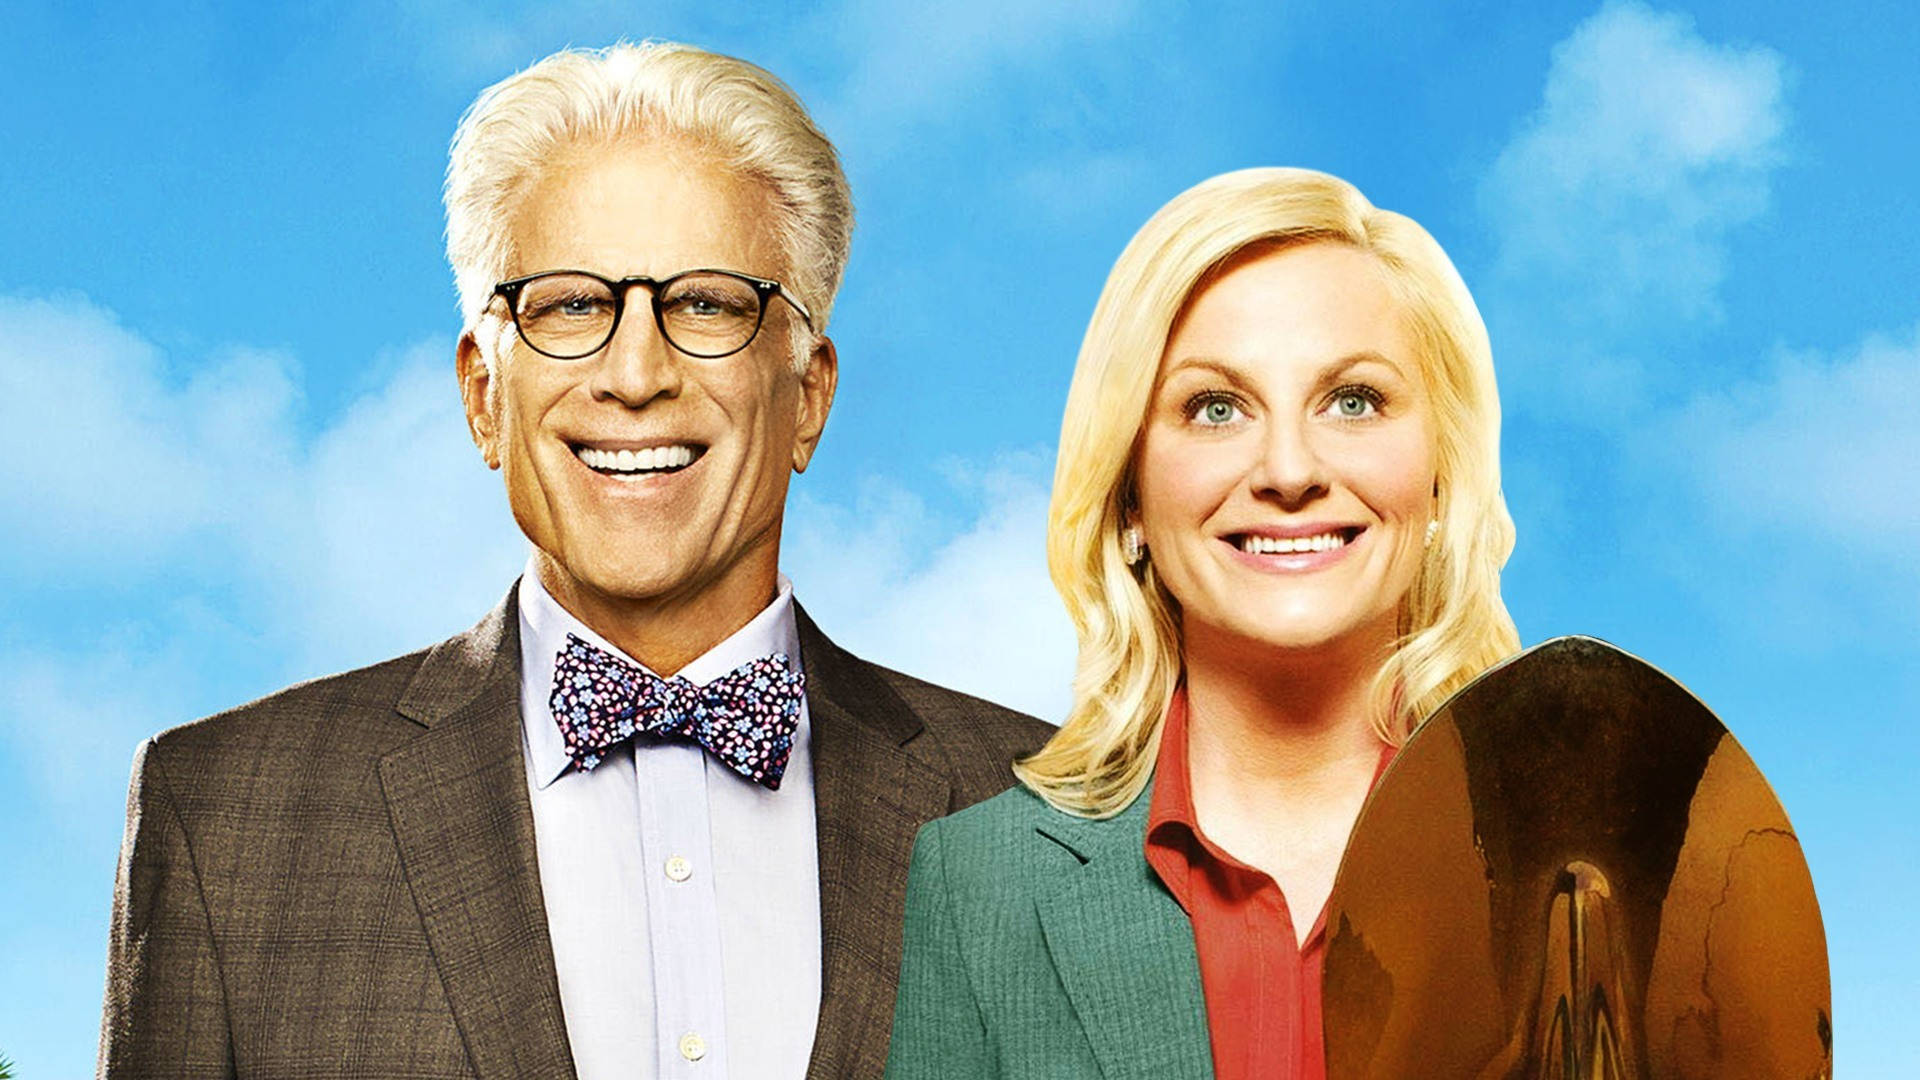 The Good Place Michael And Eleanor On Blue Sky Wallpaper